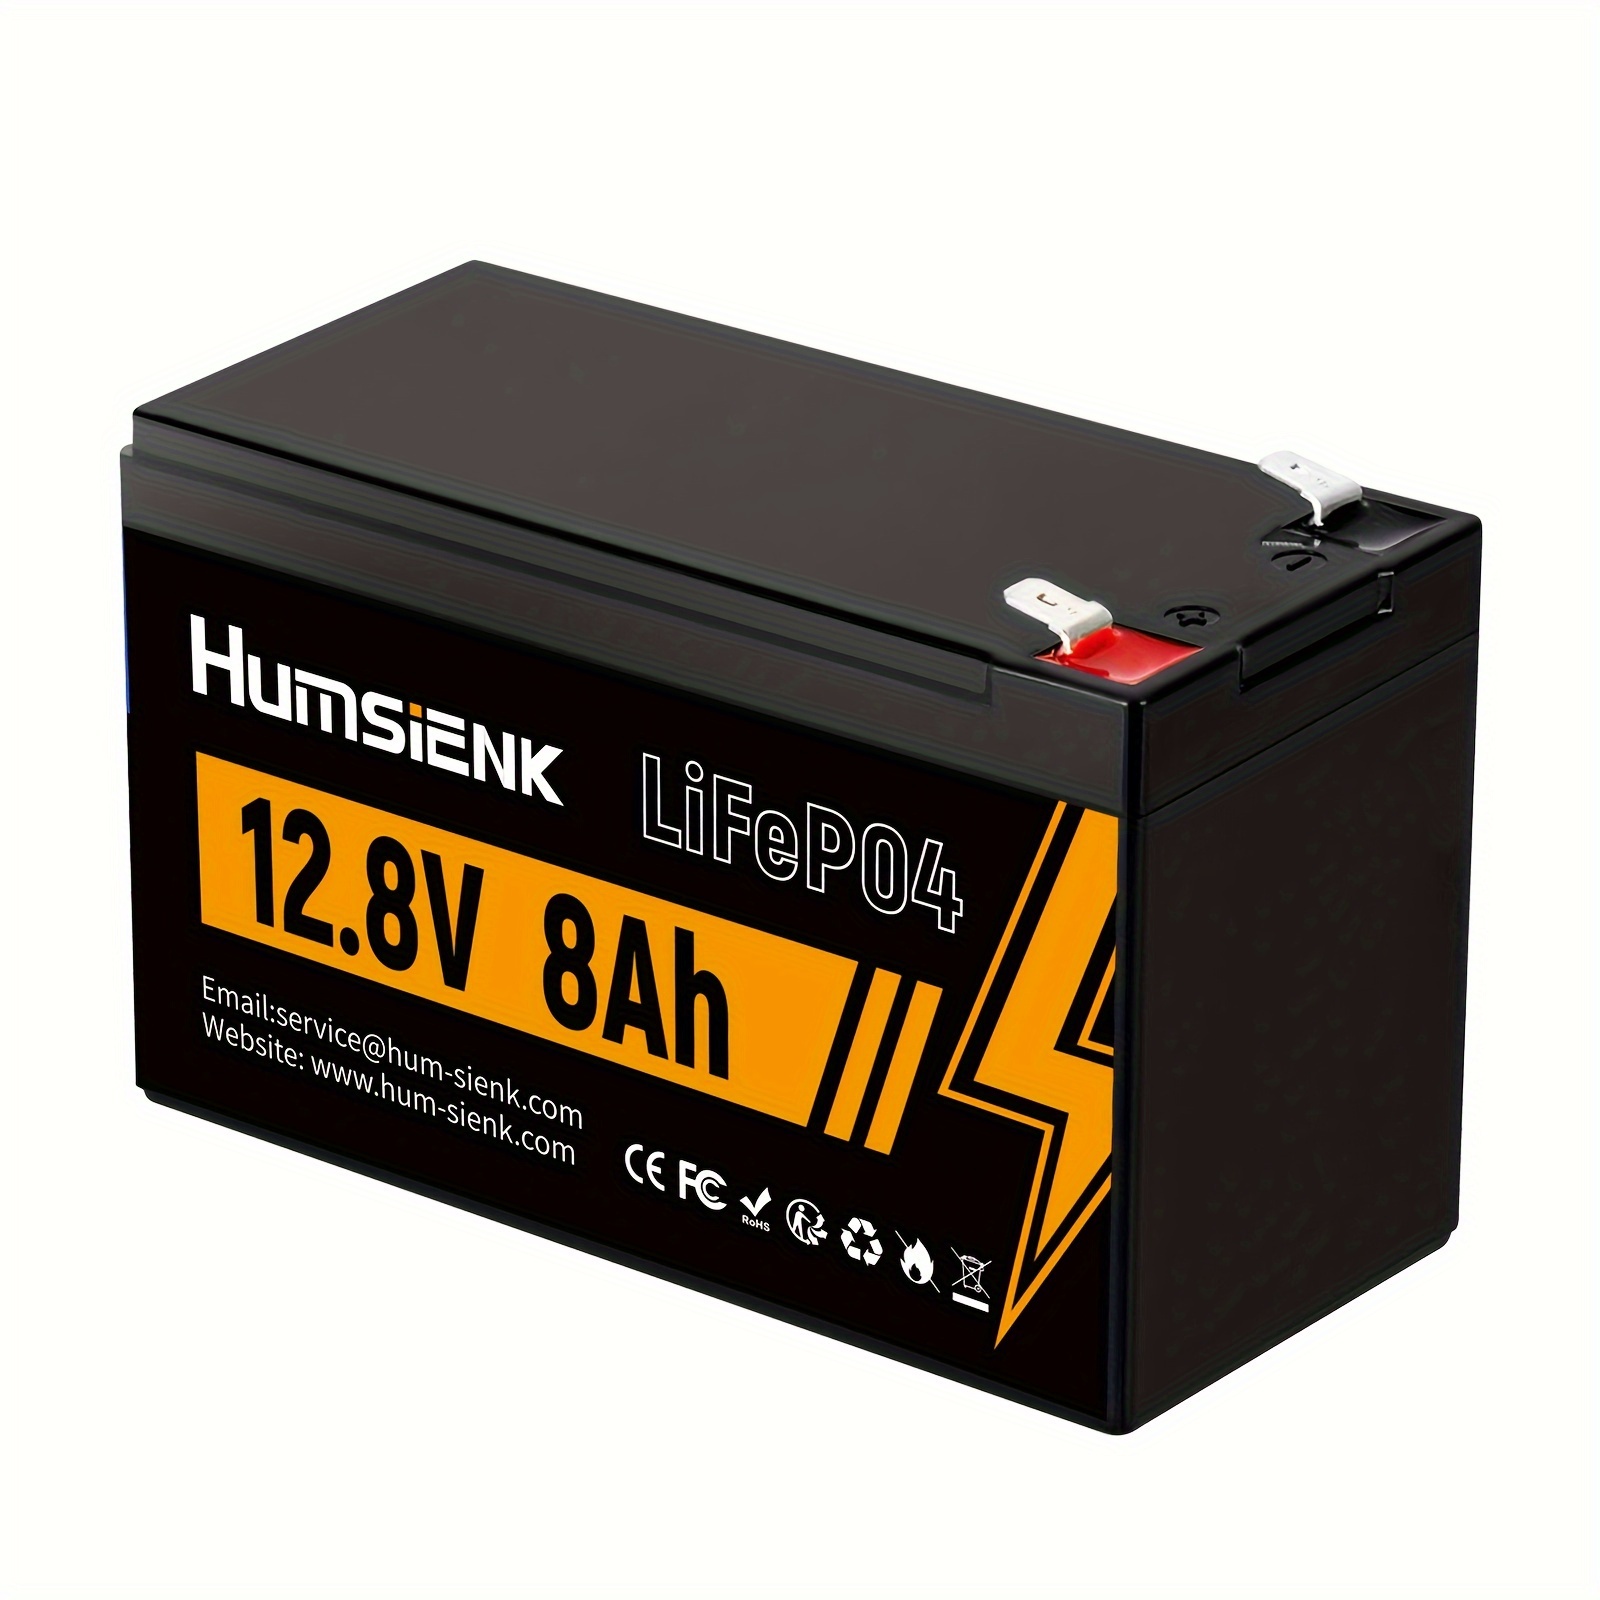 

12v 8ah Lifepo4 Battery - 6000-20000 Charge Cycles, Cold Temperature Shield - Perfect For Residential Energy Storage